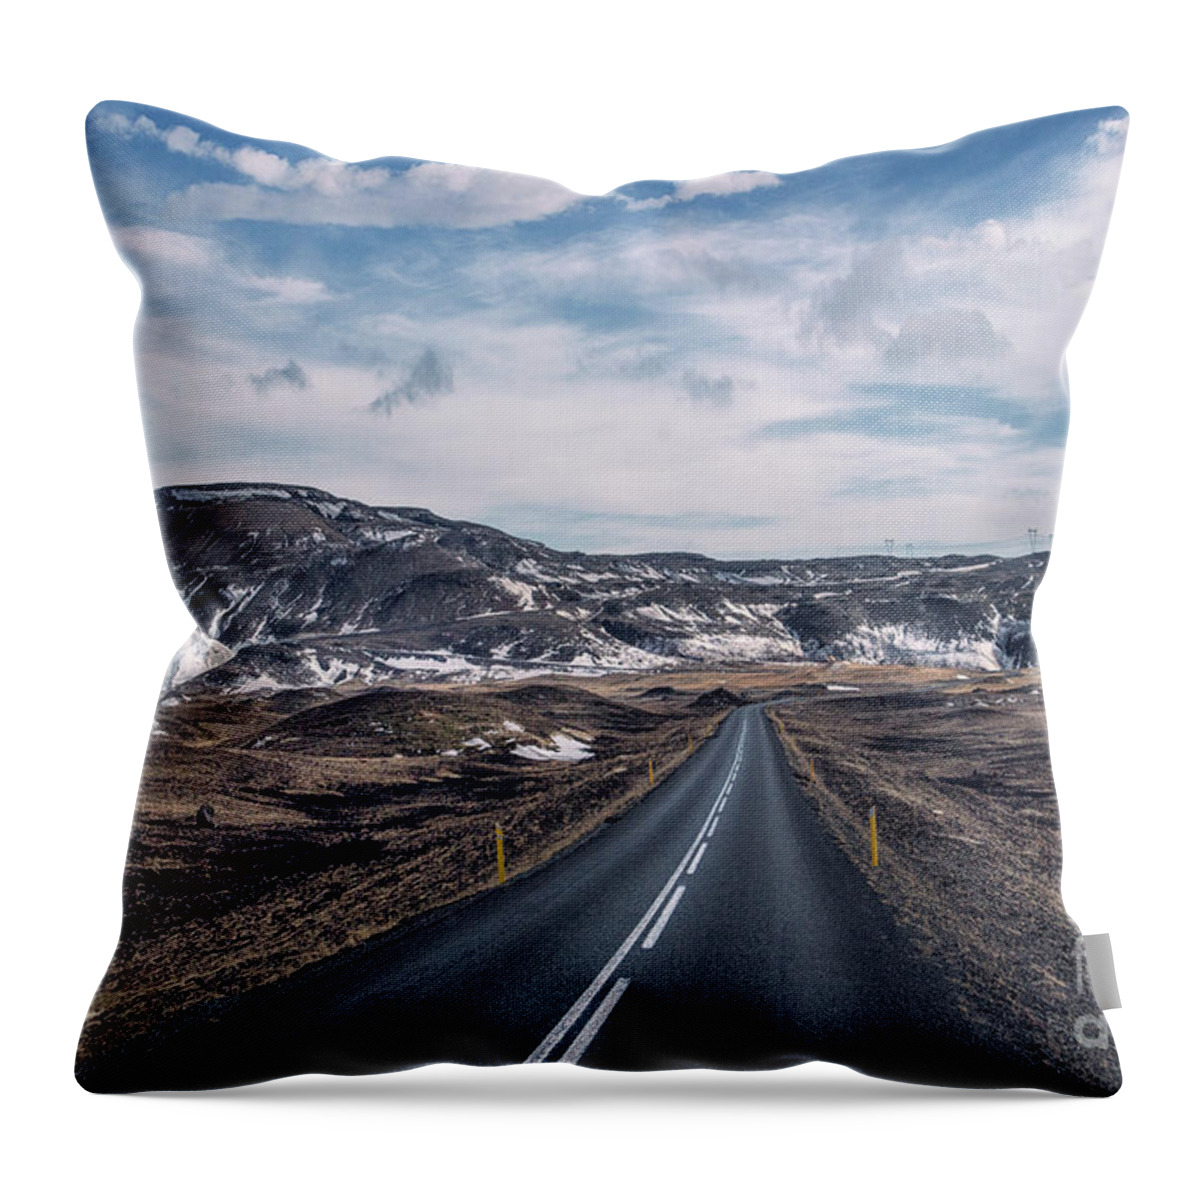 Kremsdorf Throw Pillow featuring the photograph Everywhere My Heart Goes by Evelina Kremsdorf